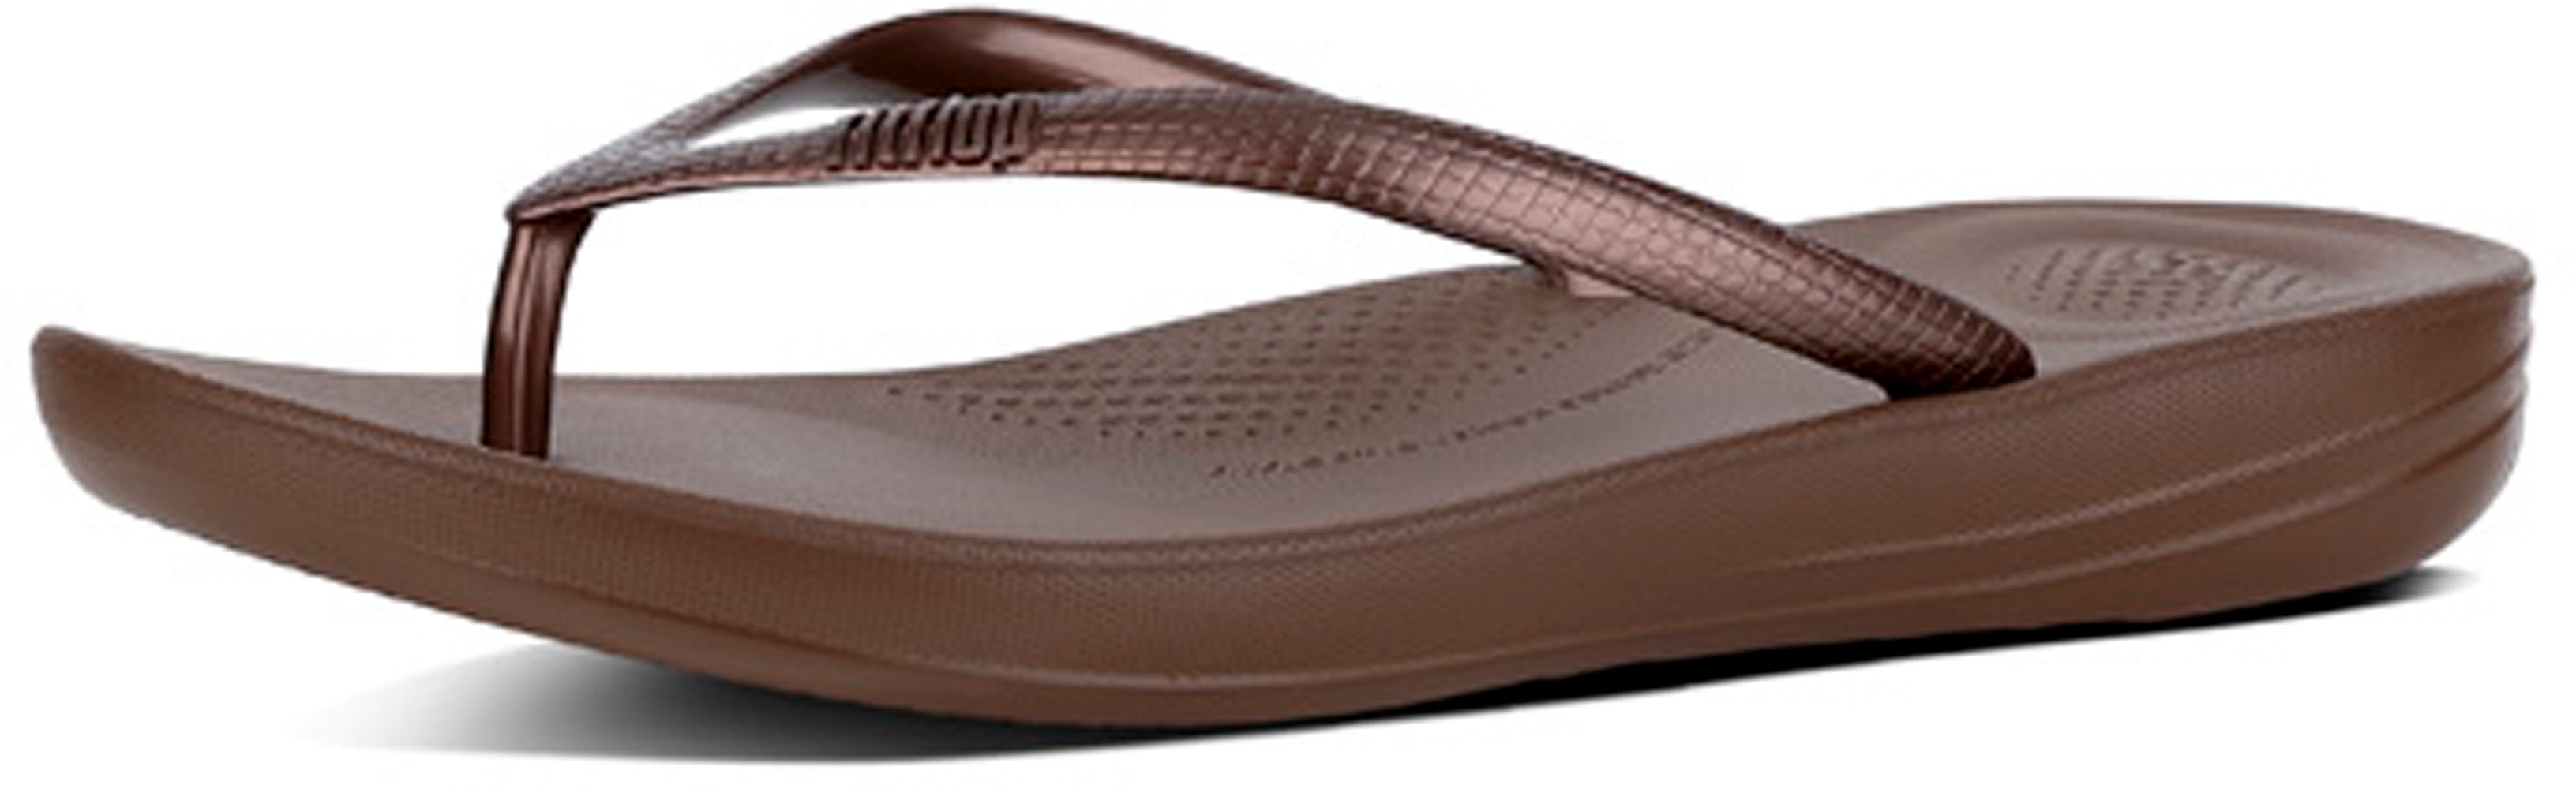 Women's FitFlop Iqushion Ergonomic Flip-Flops in Bronze Side Angle View